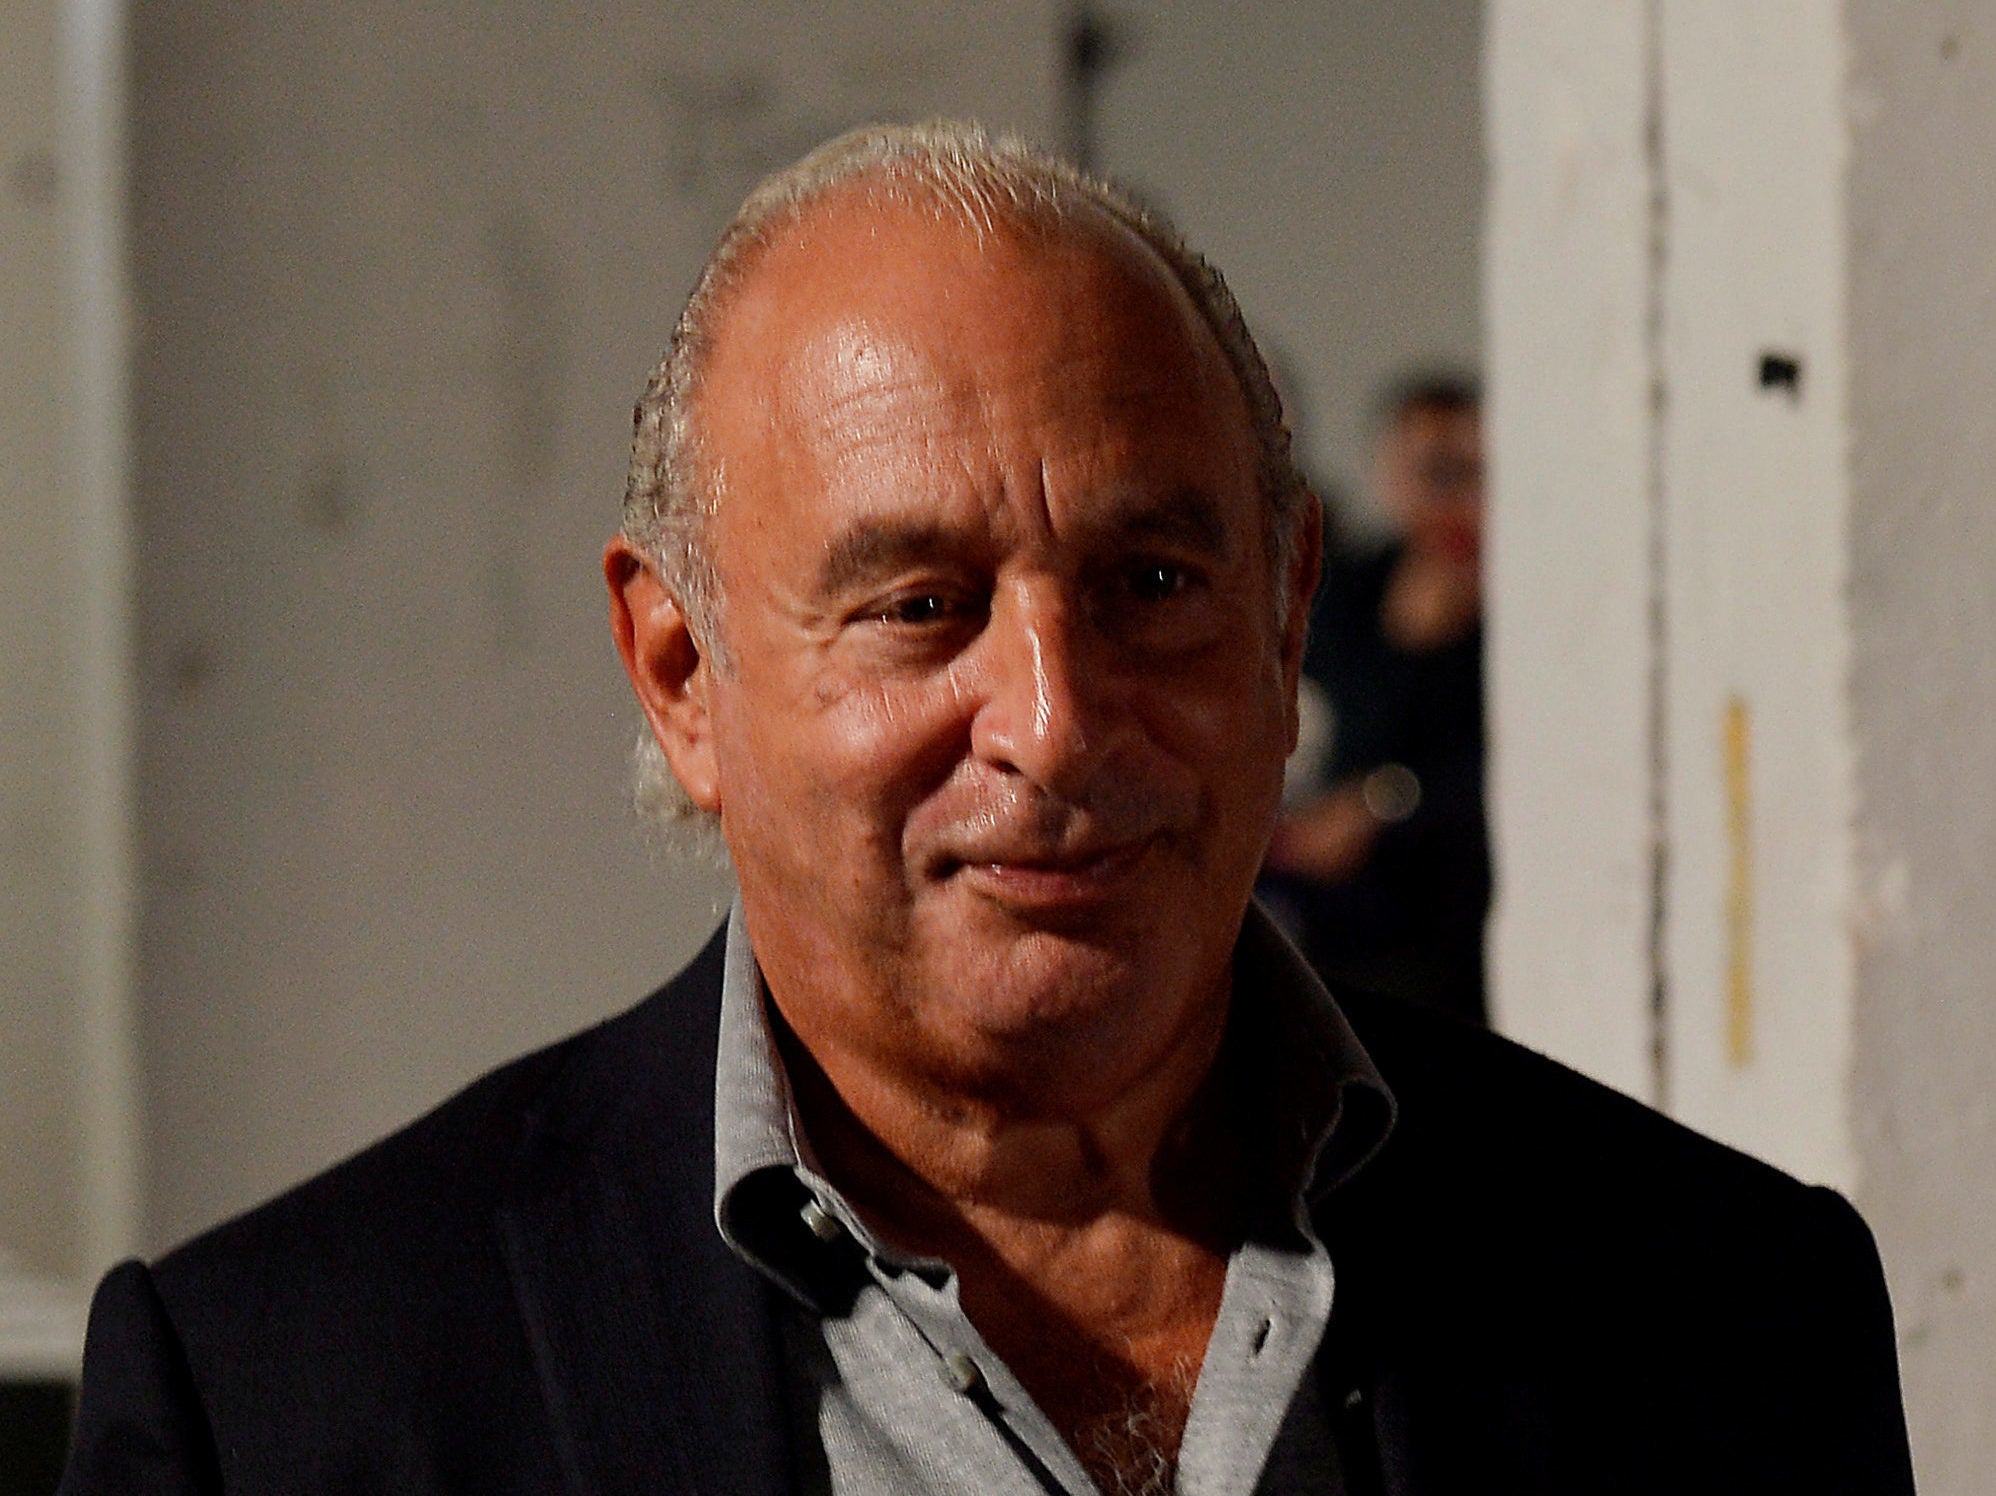 Telegraph lawyers ask Sir Philip Green to drop injunction against newspaper after tycoon responds to naming in Parliament